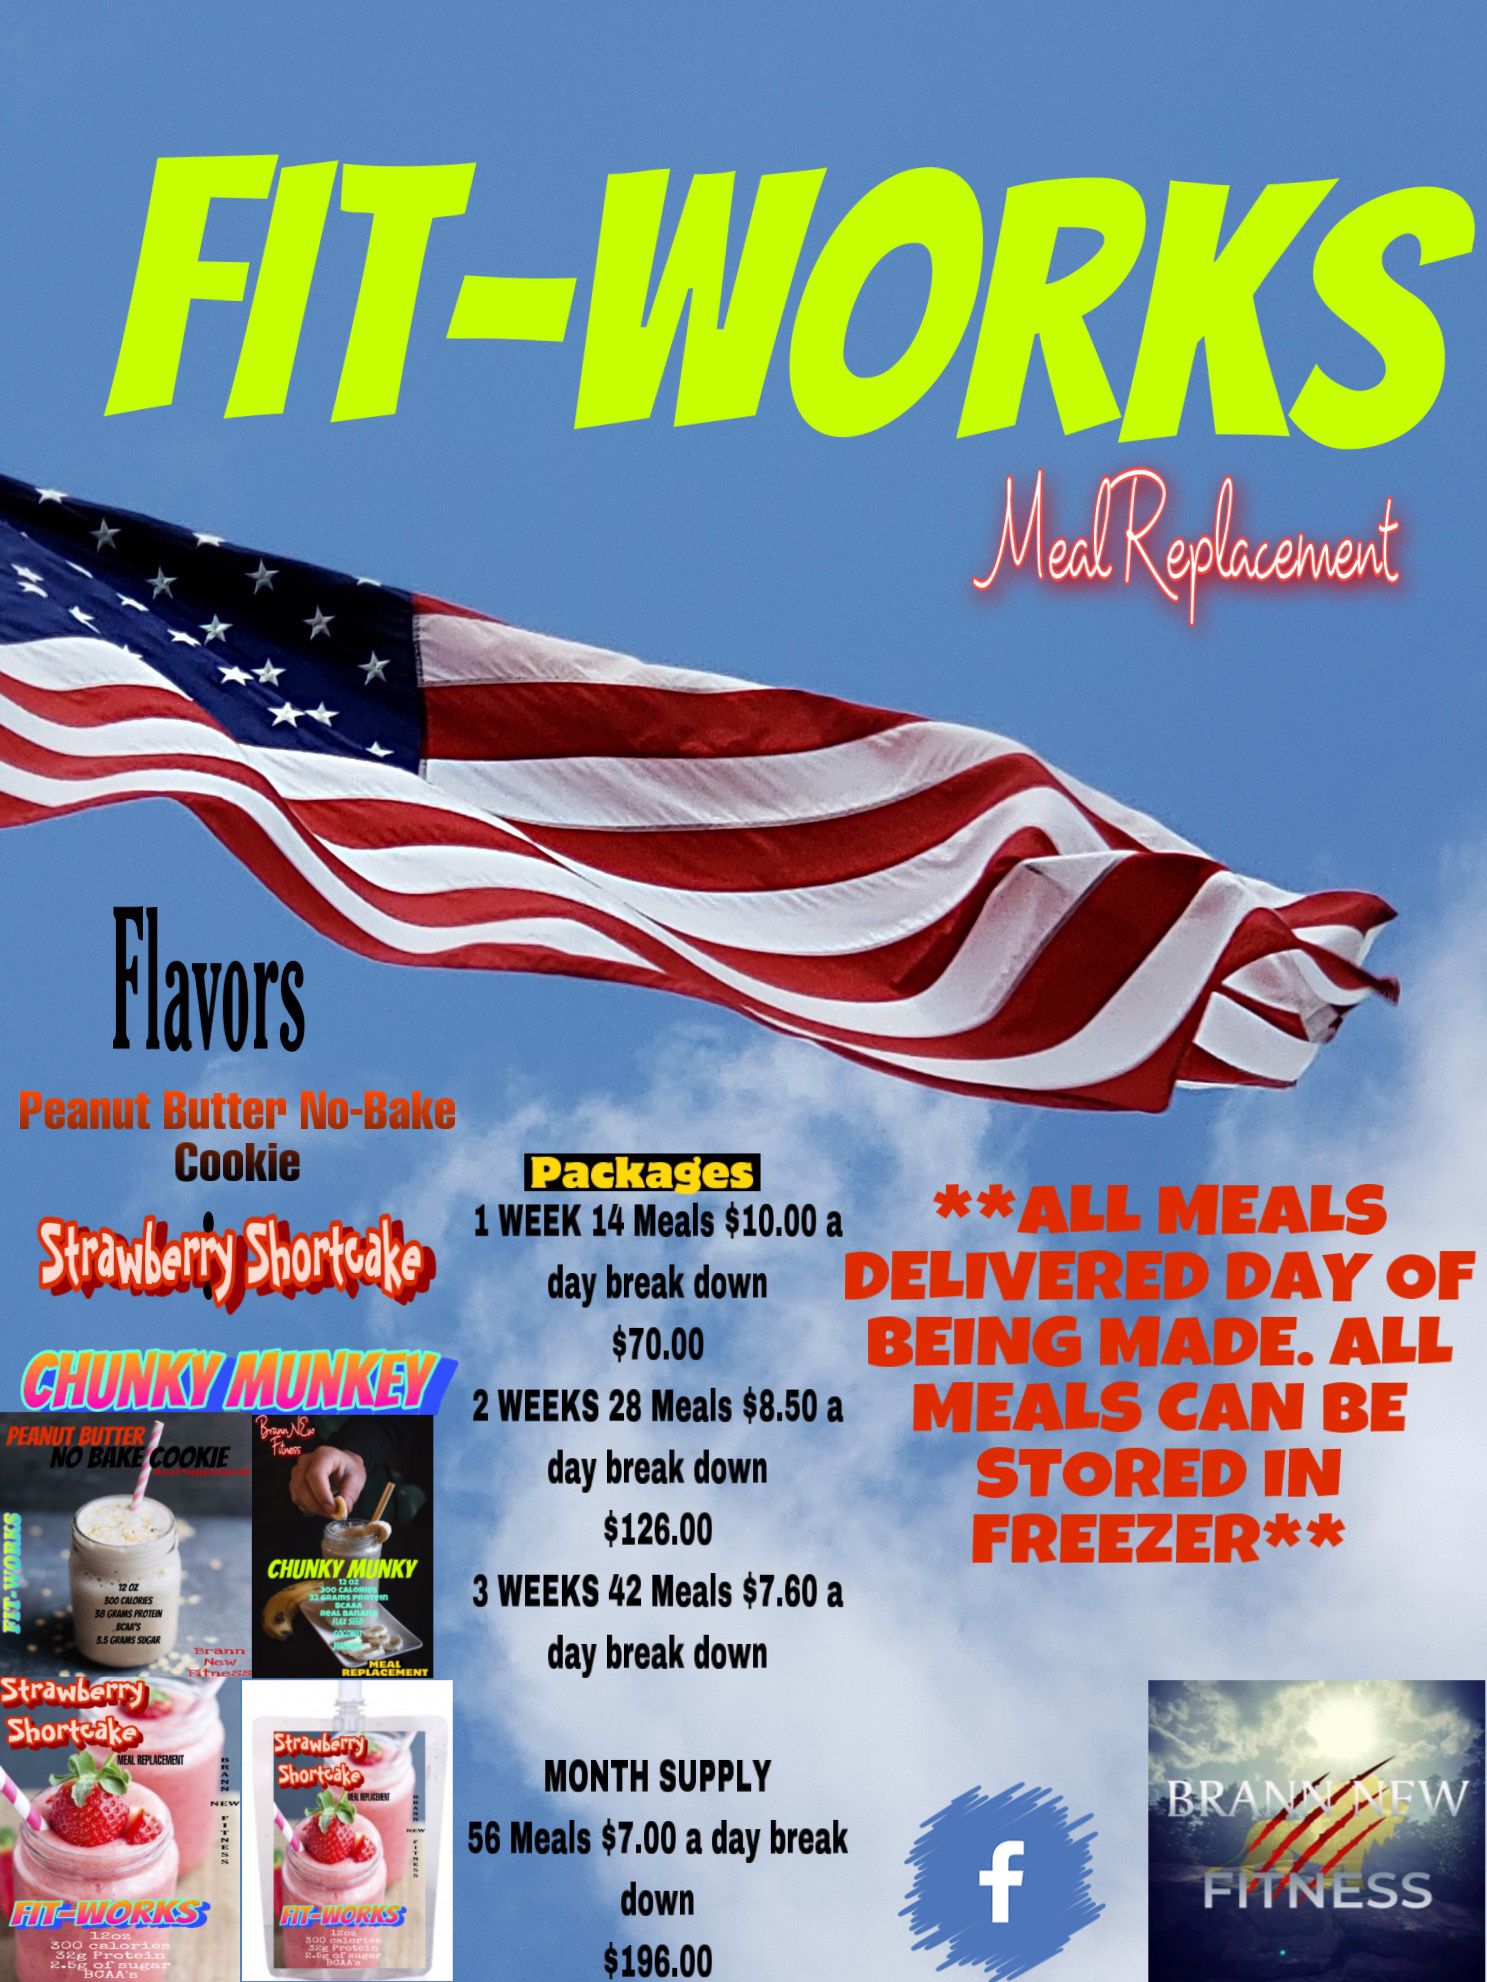 FIT-WORKS MEAL REPLACEMENT SHAKE